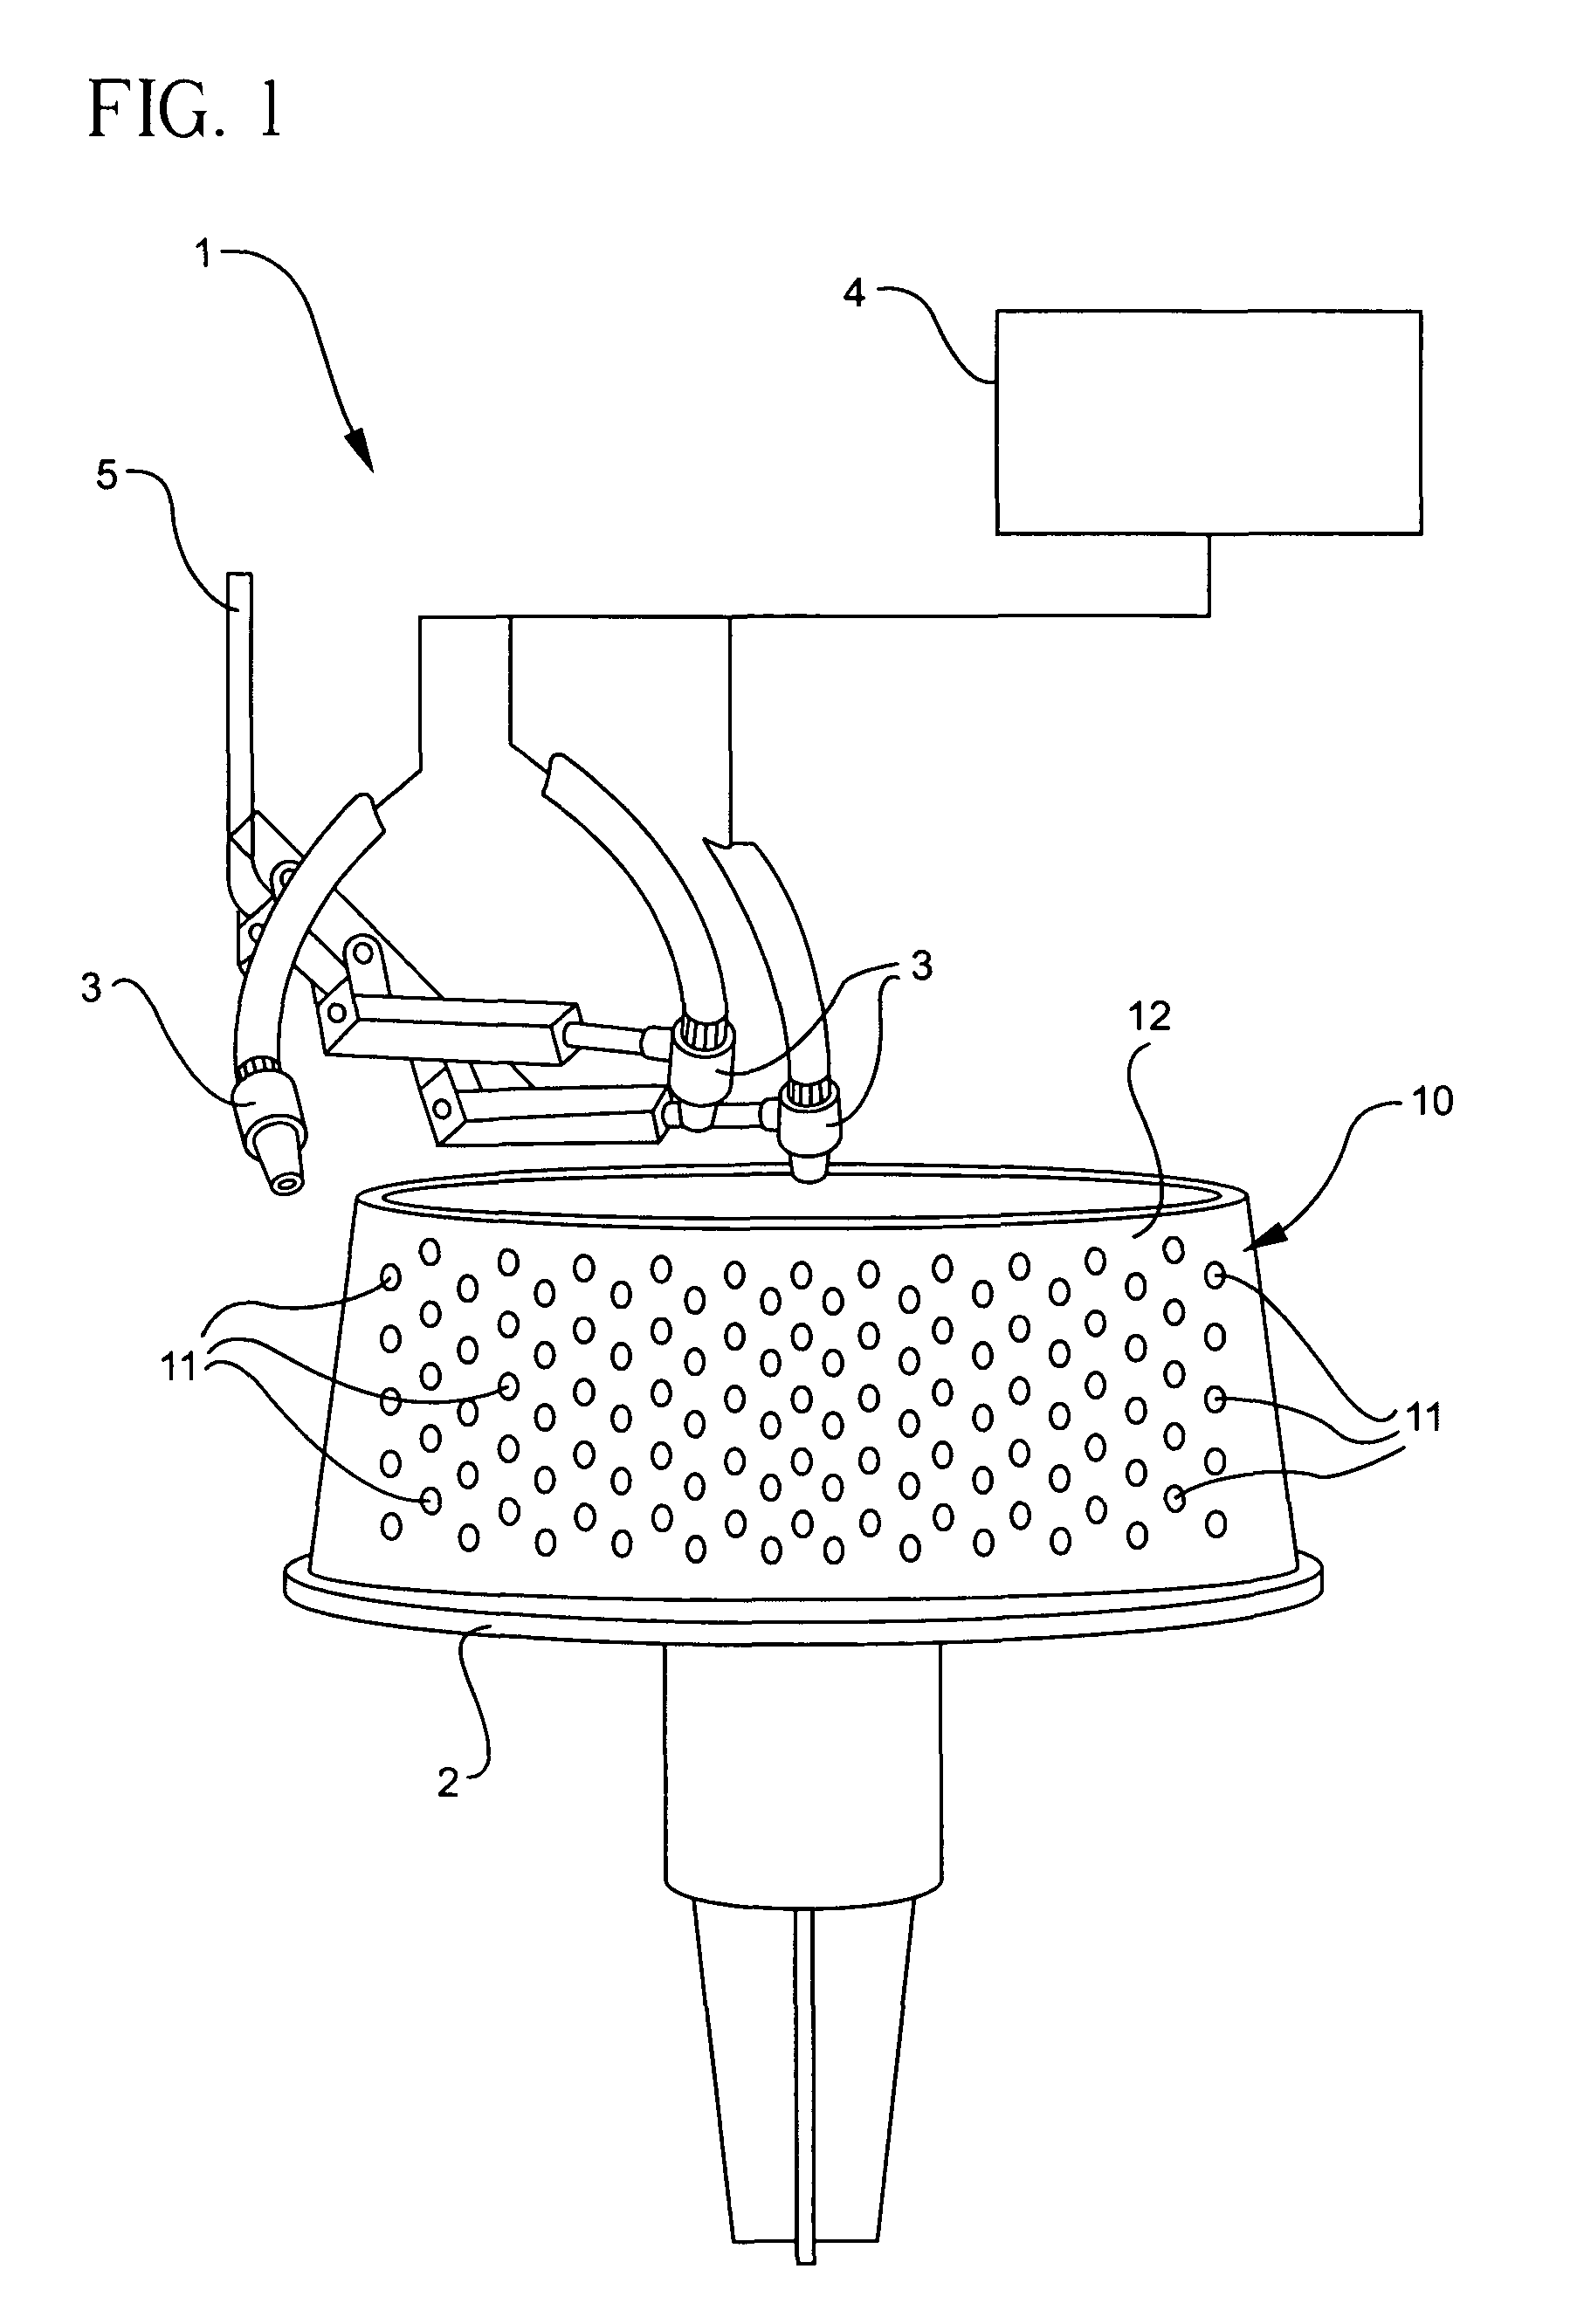 Process for removing thermal barrier coatings